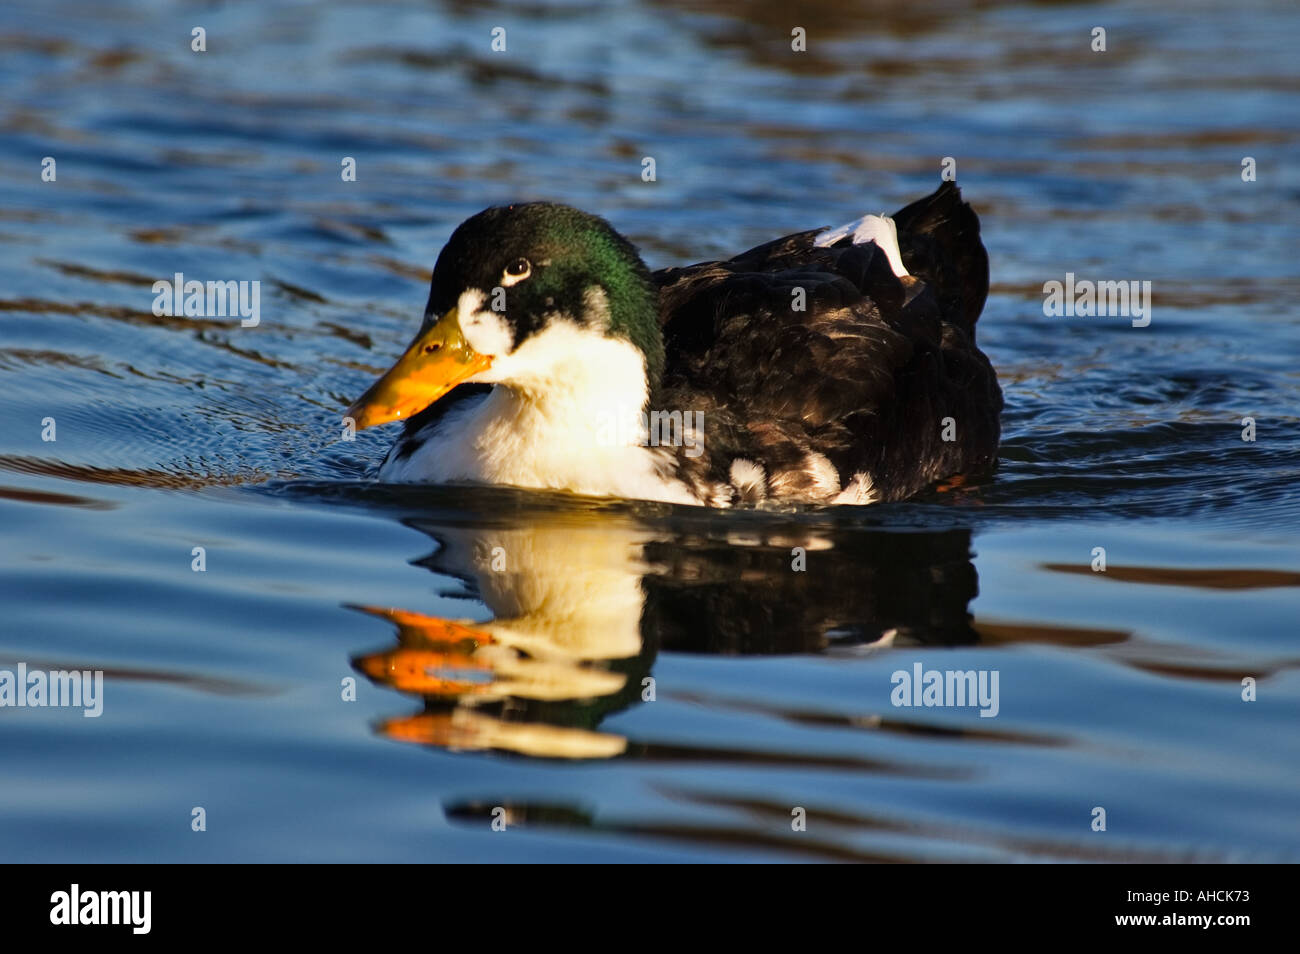 Mixed Breed Duck and Reflection in Water Stock Photo